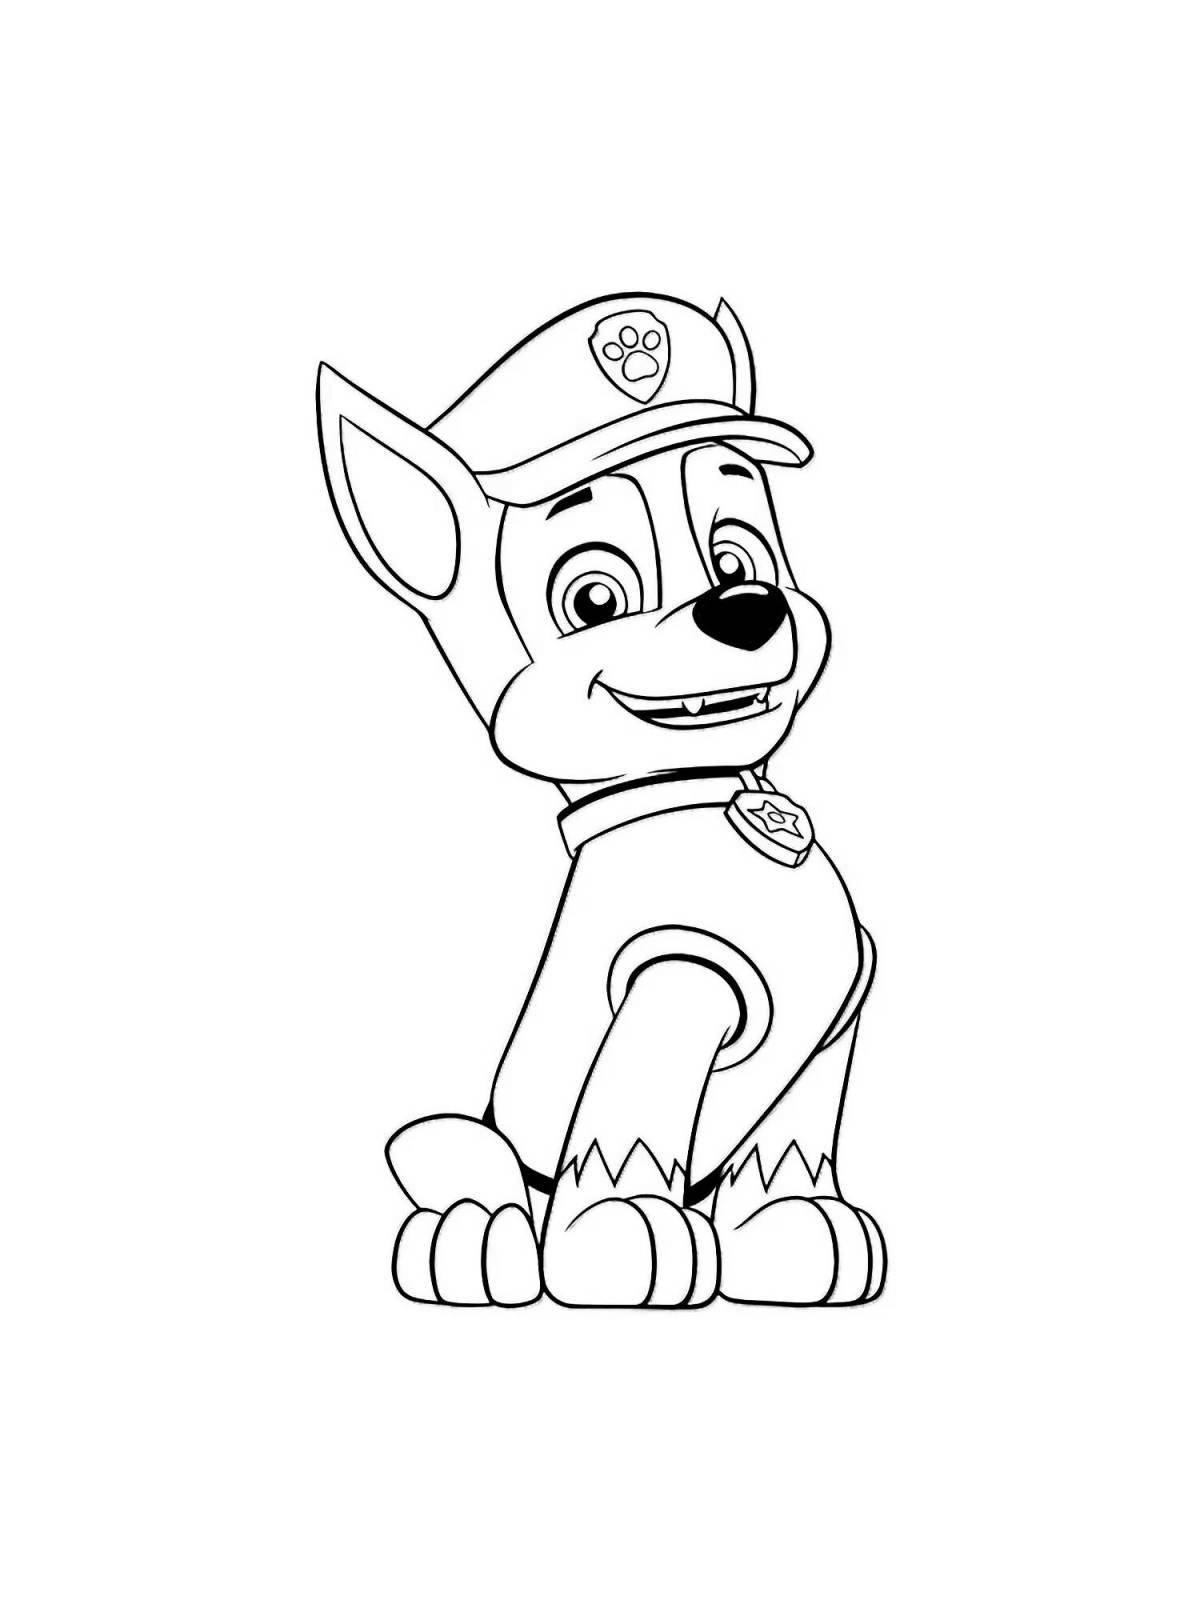 Coloring page funny racer for kids